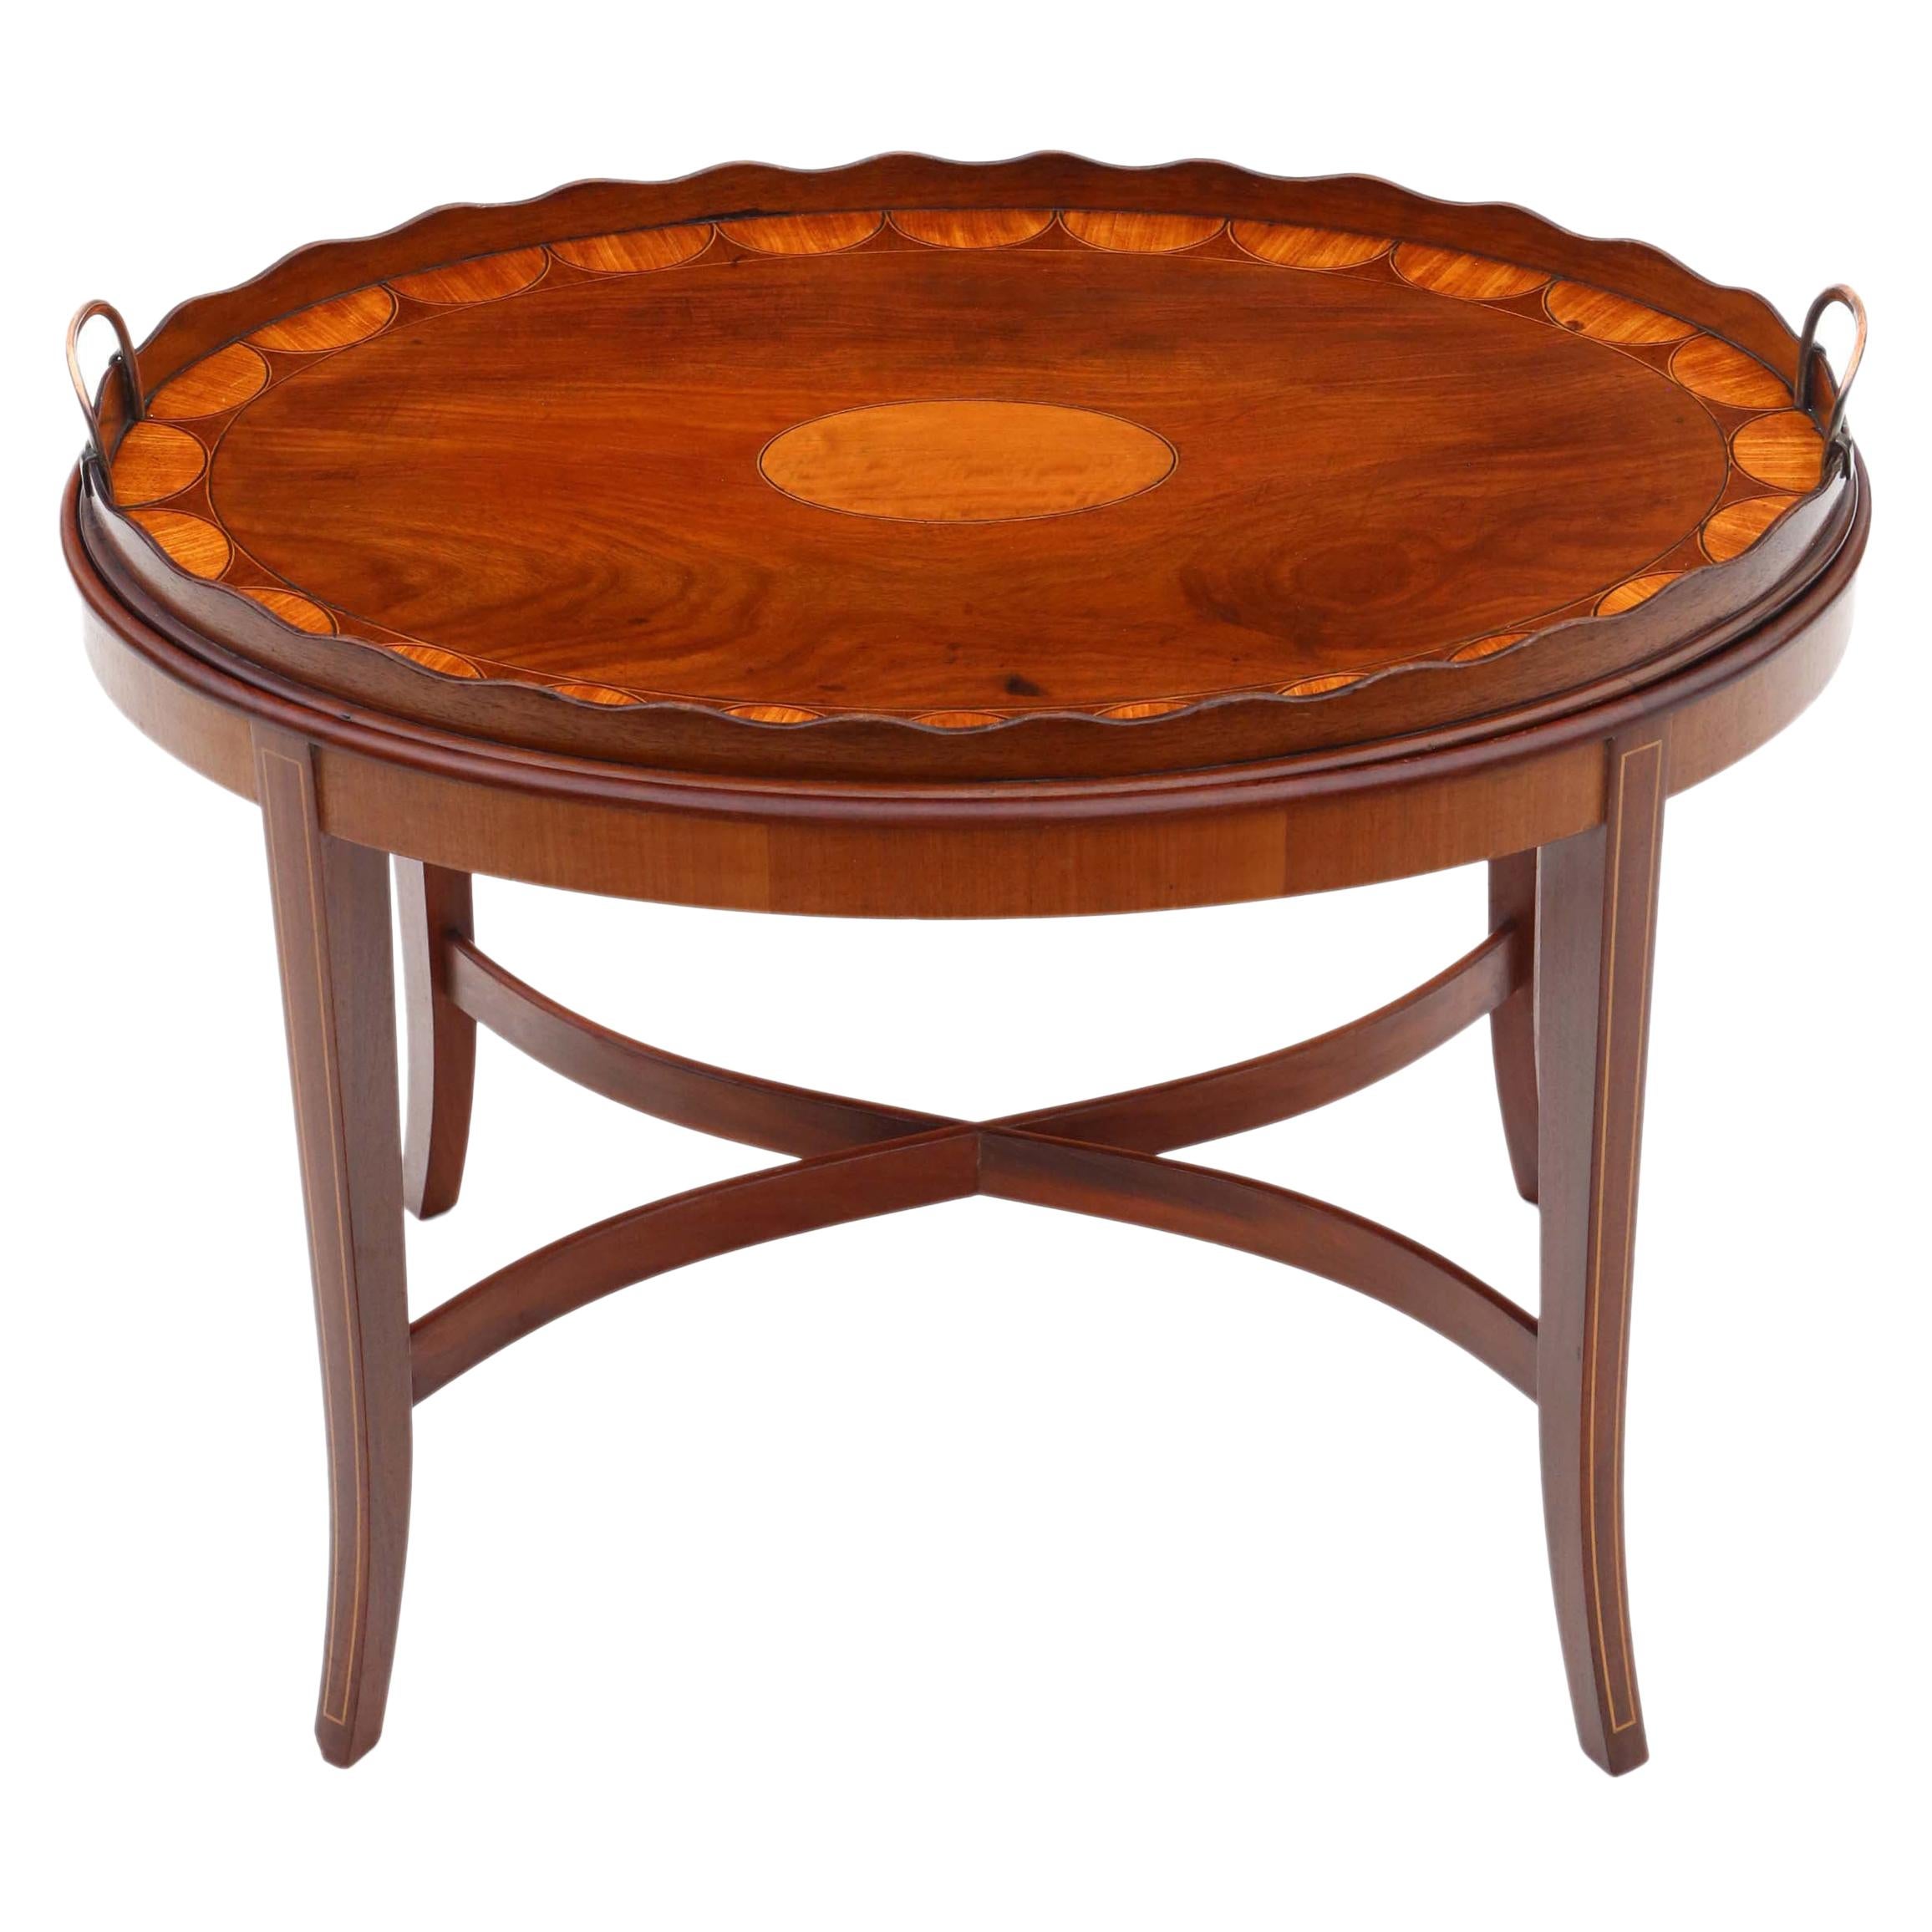 Antique Edwardian Mahogany and Satin Walnut Tray on Stand Coffee Table